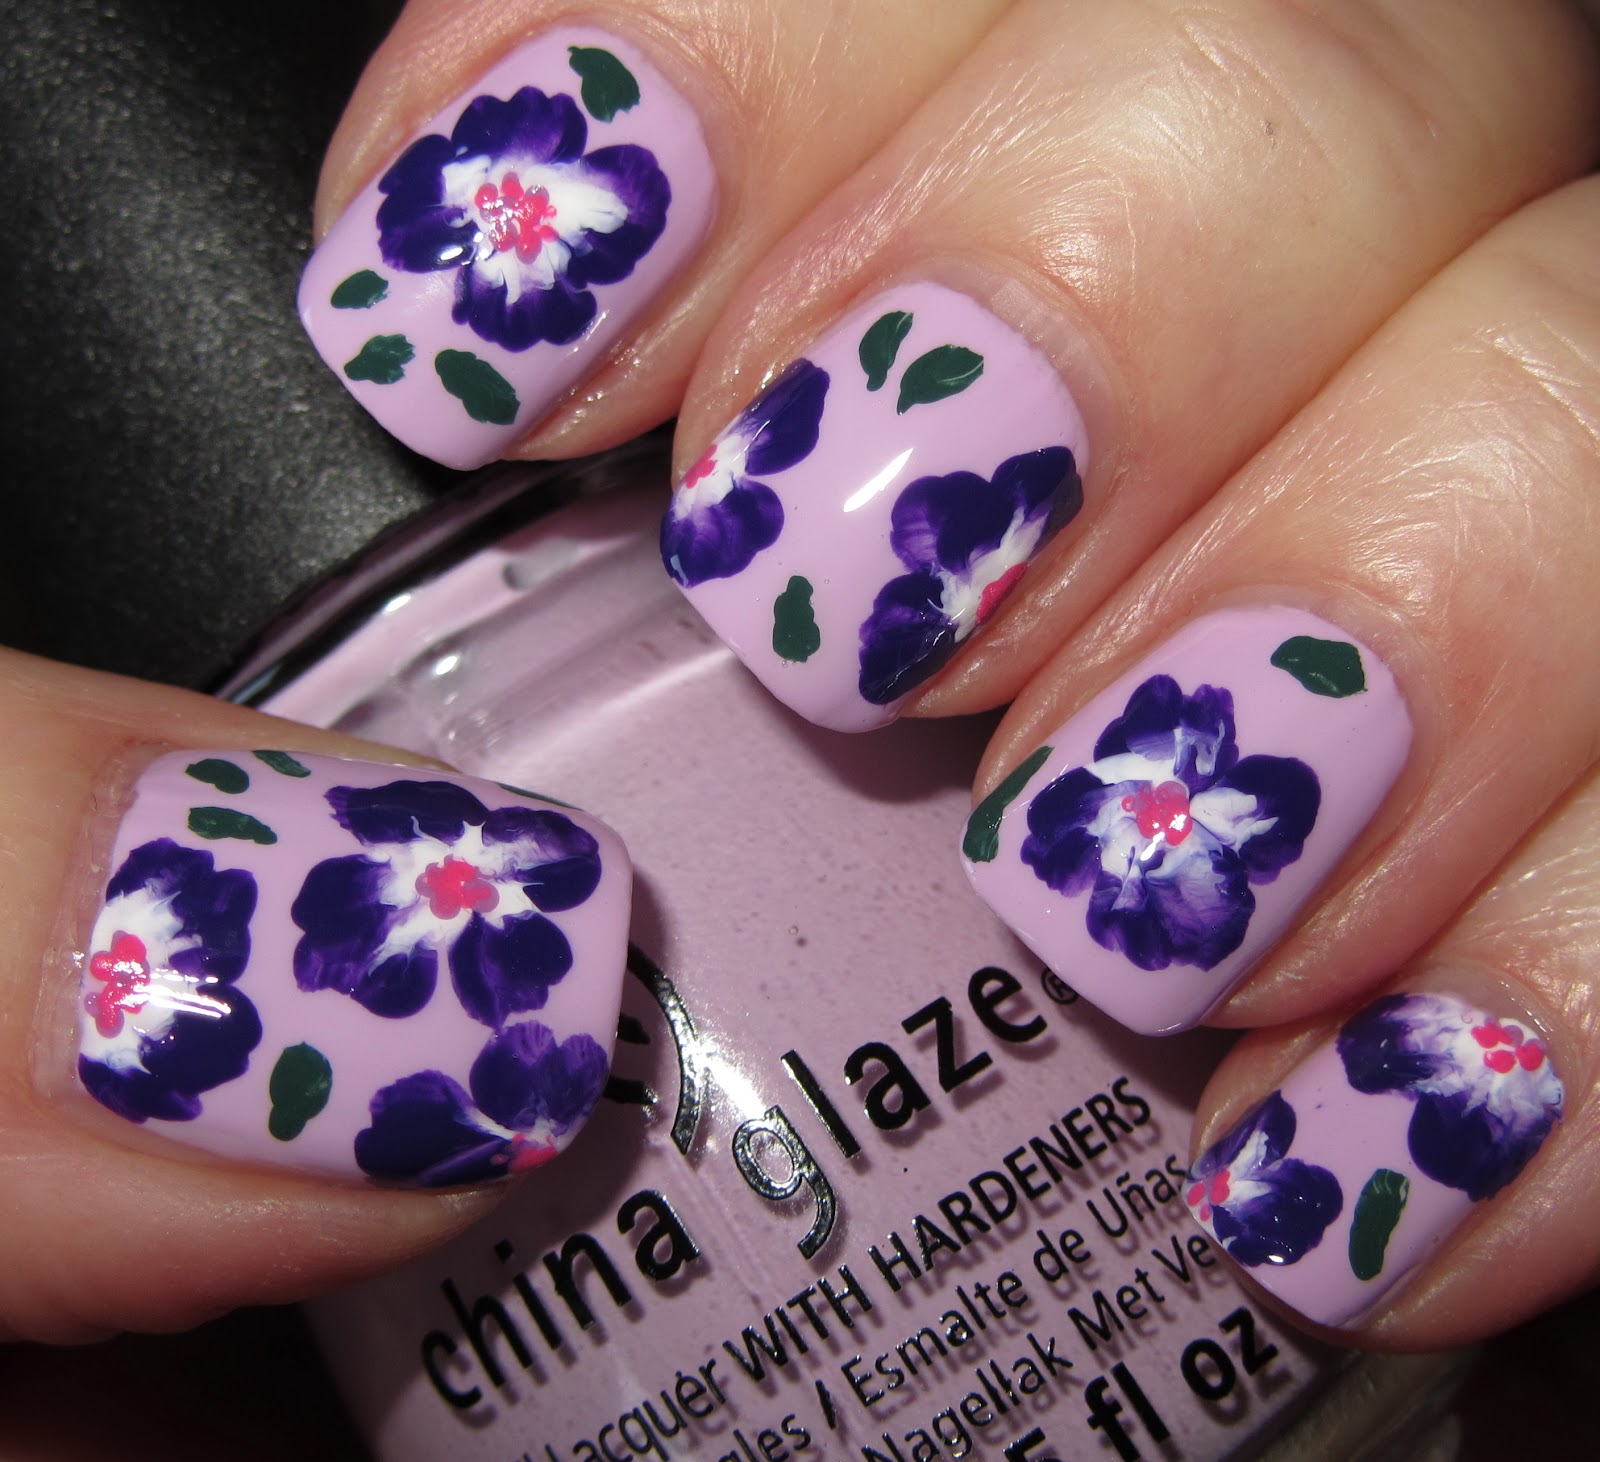 Marias Nail Art and Polish Blog: Hooked on sweet flowers